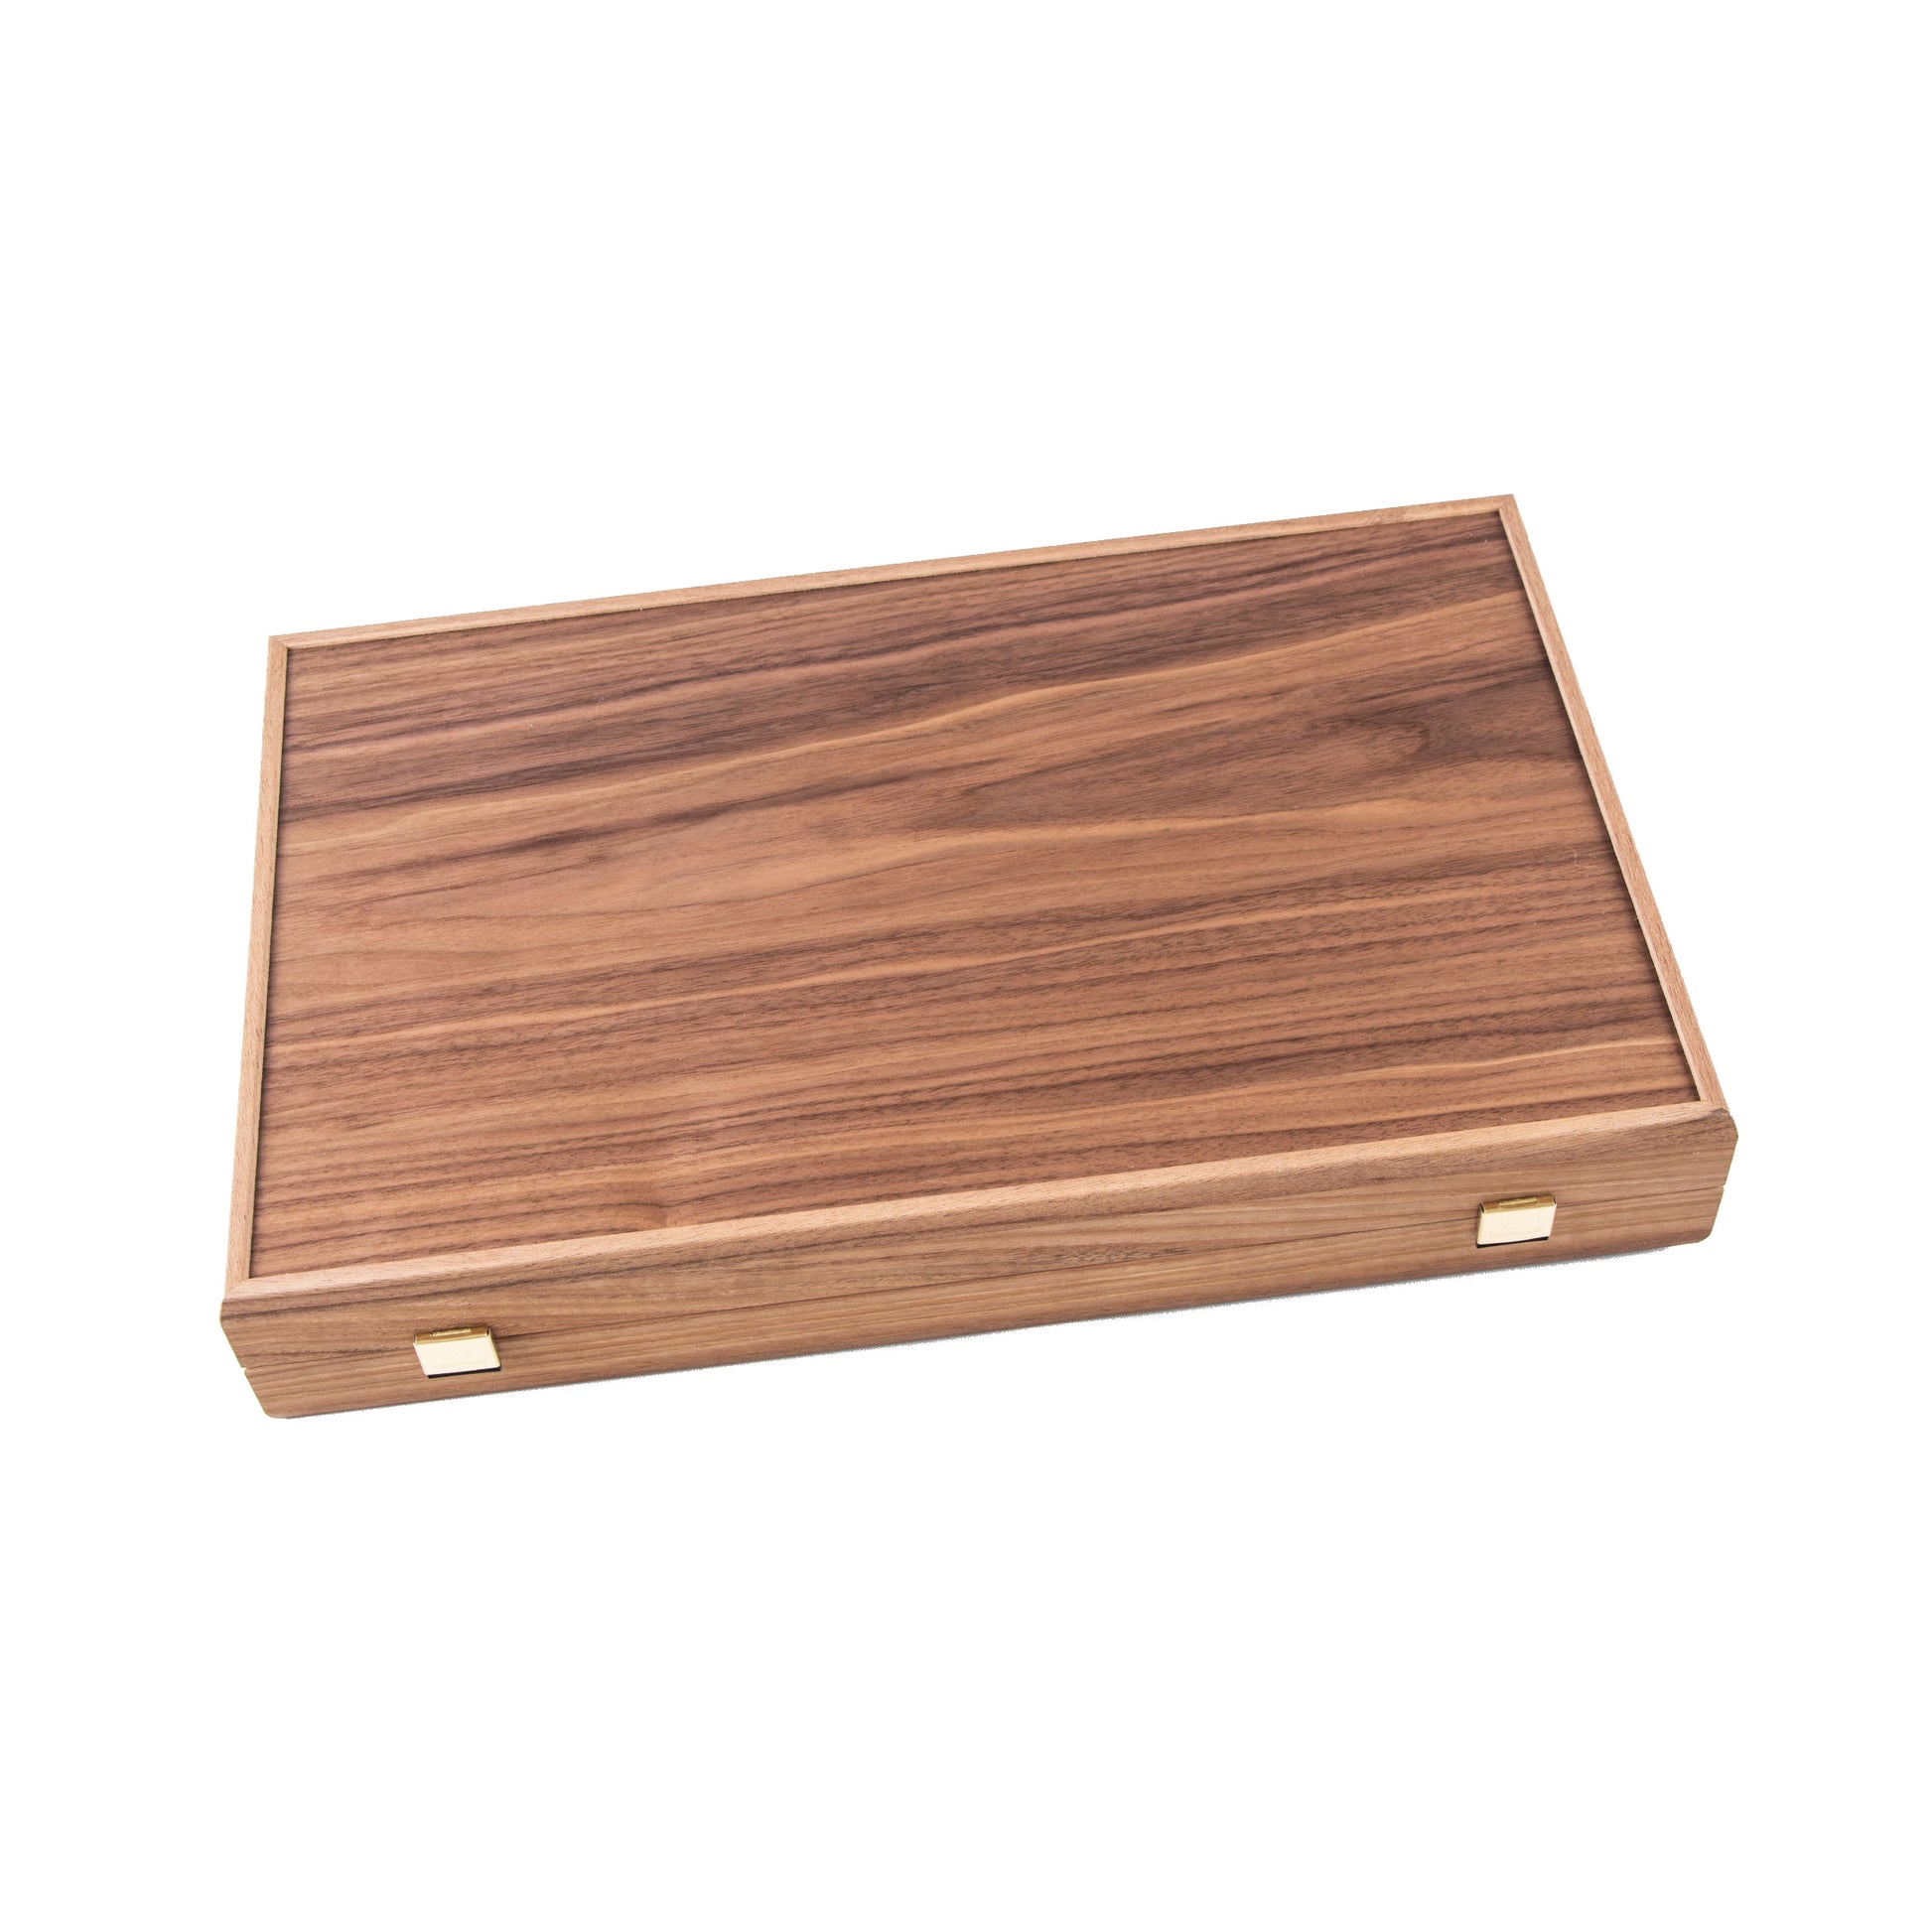 Premium Handcrafted American Walnut with Black Oak Backgammon Set - Premium Backgammon from MANOPOULOS Chess & Backgammon - Just €193! Shop now at MANOPOULOS Chess & Backgammon